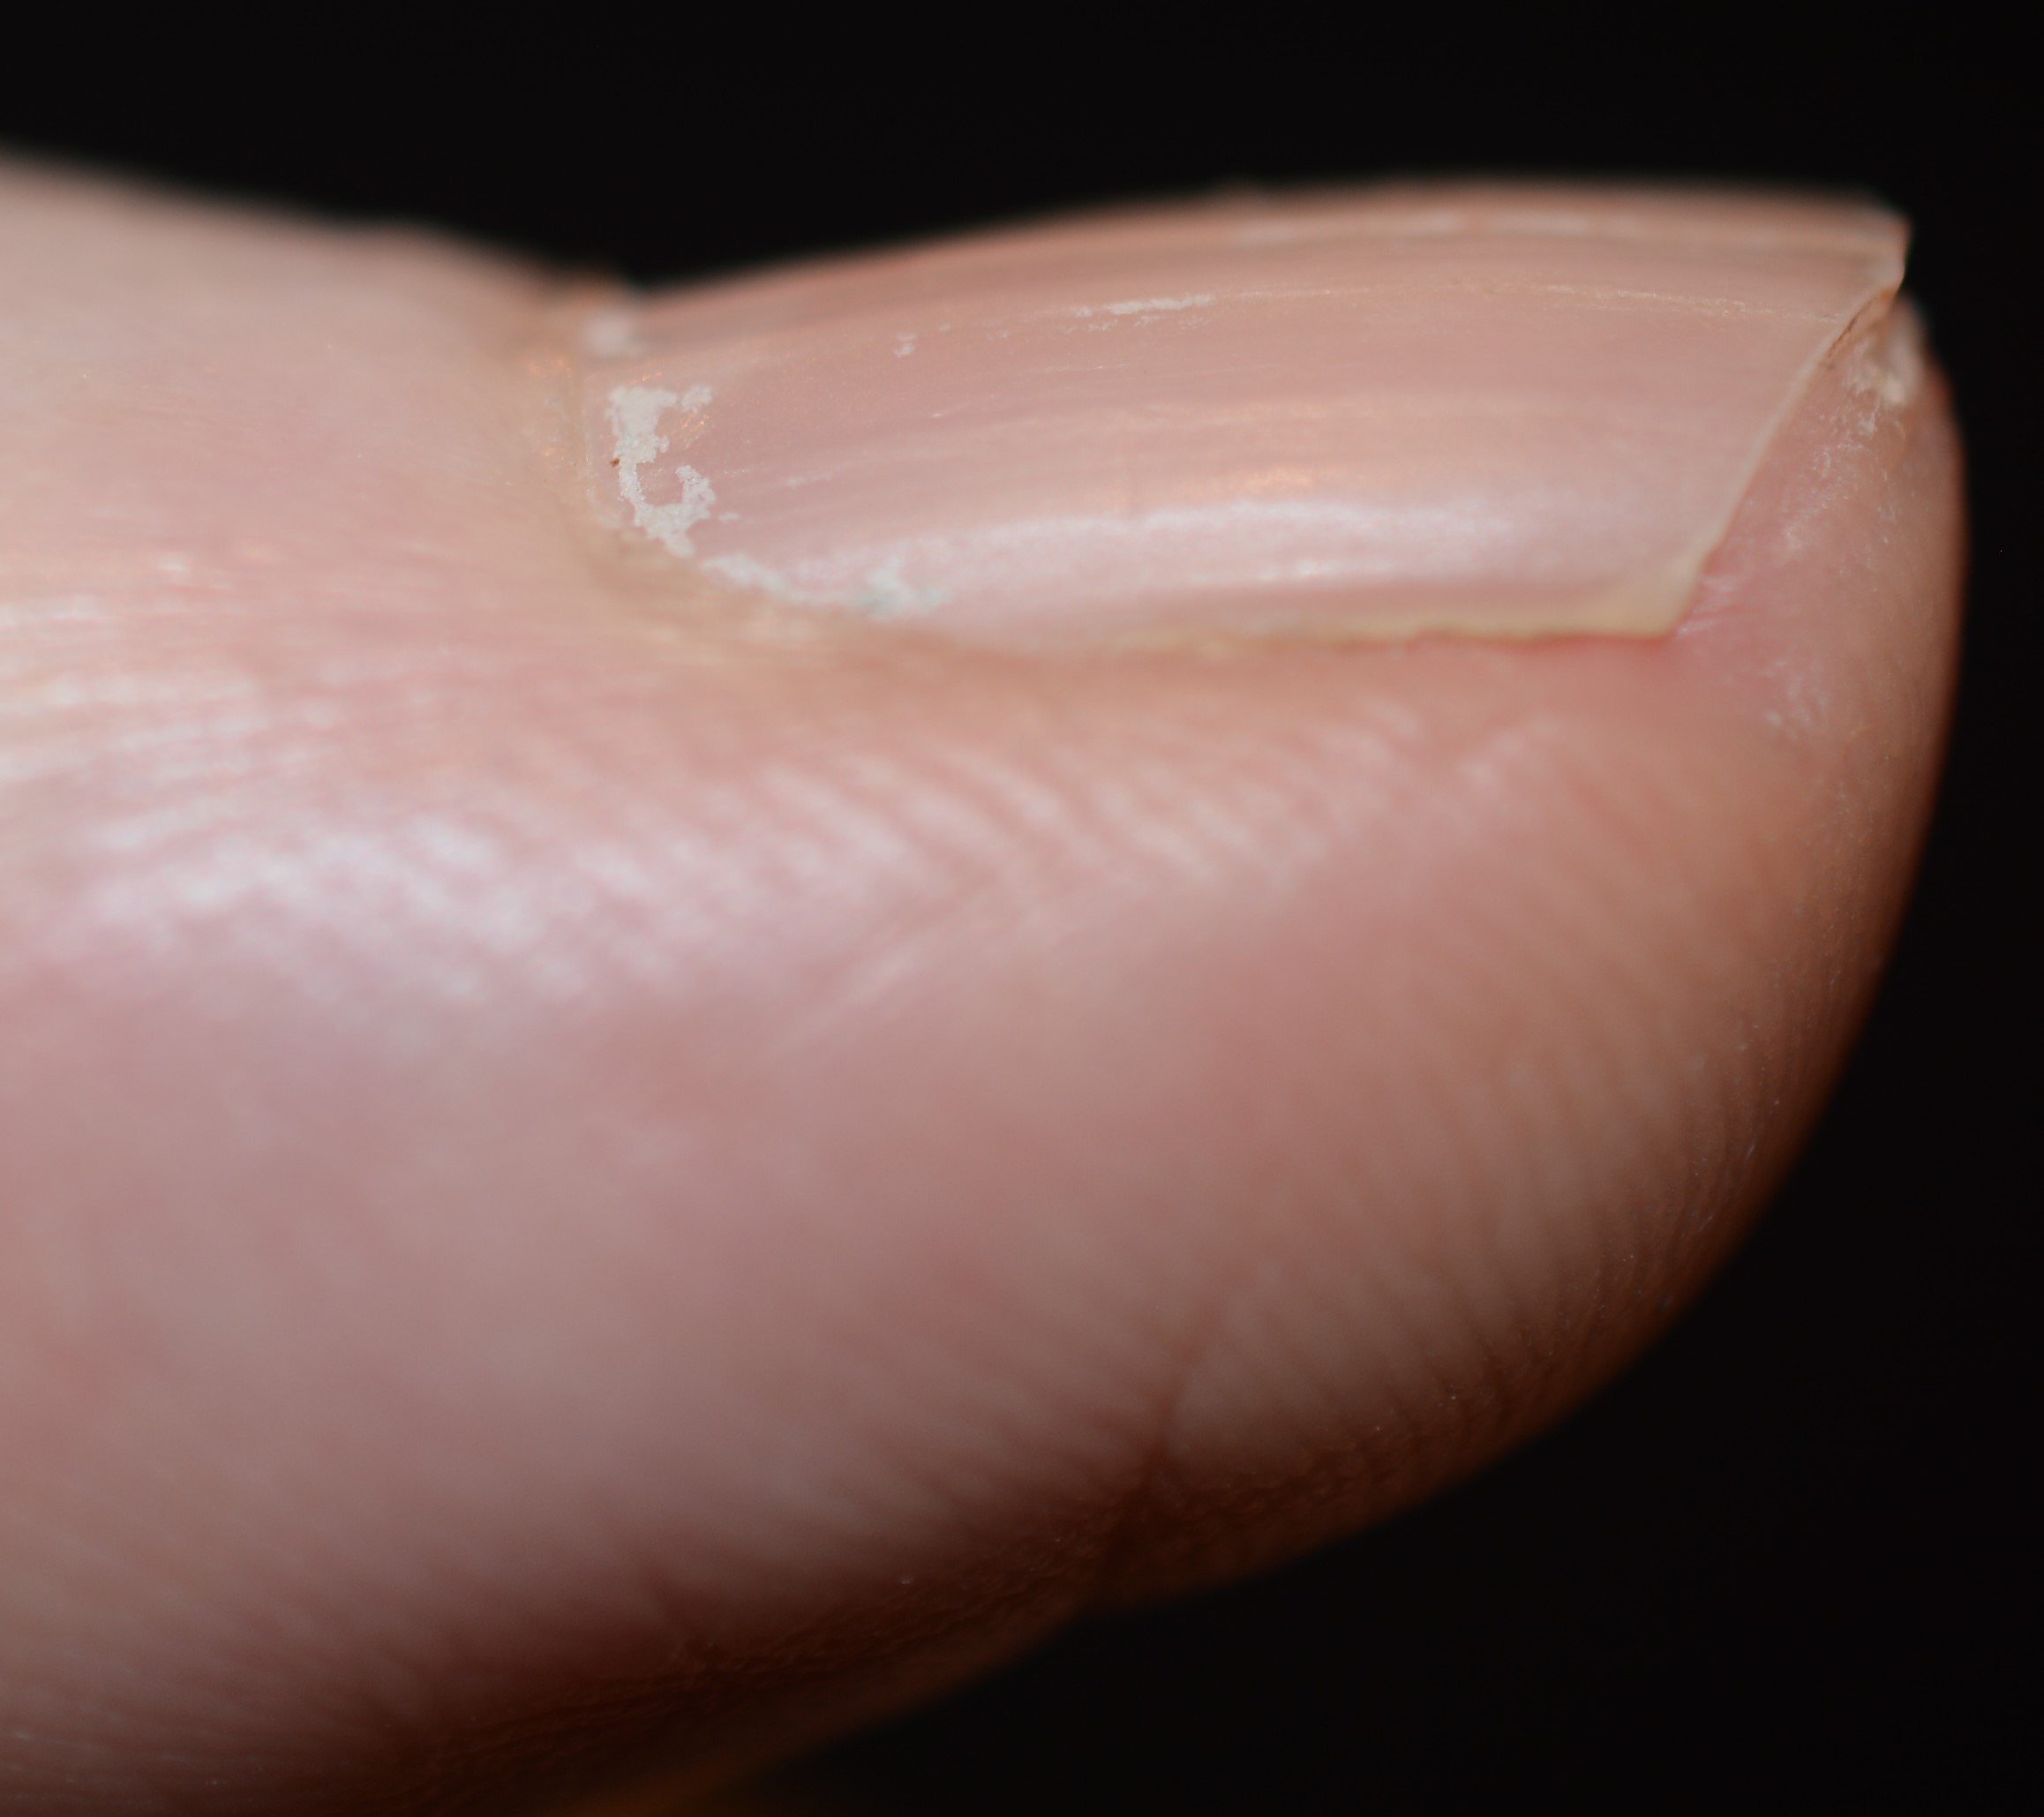 My nail lichen planus began improving within 4 months of the treatment...